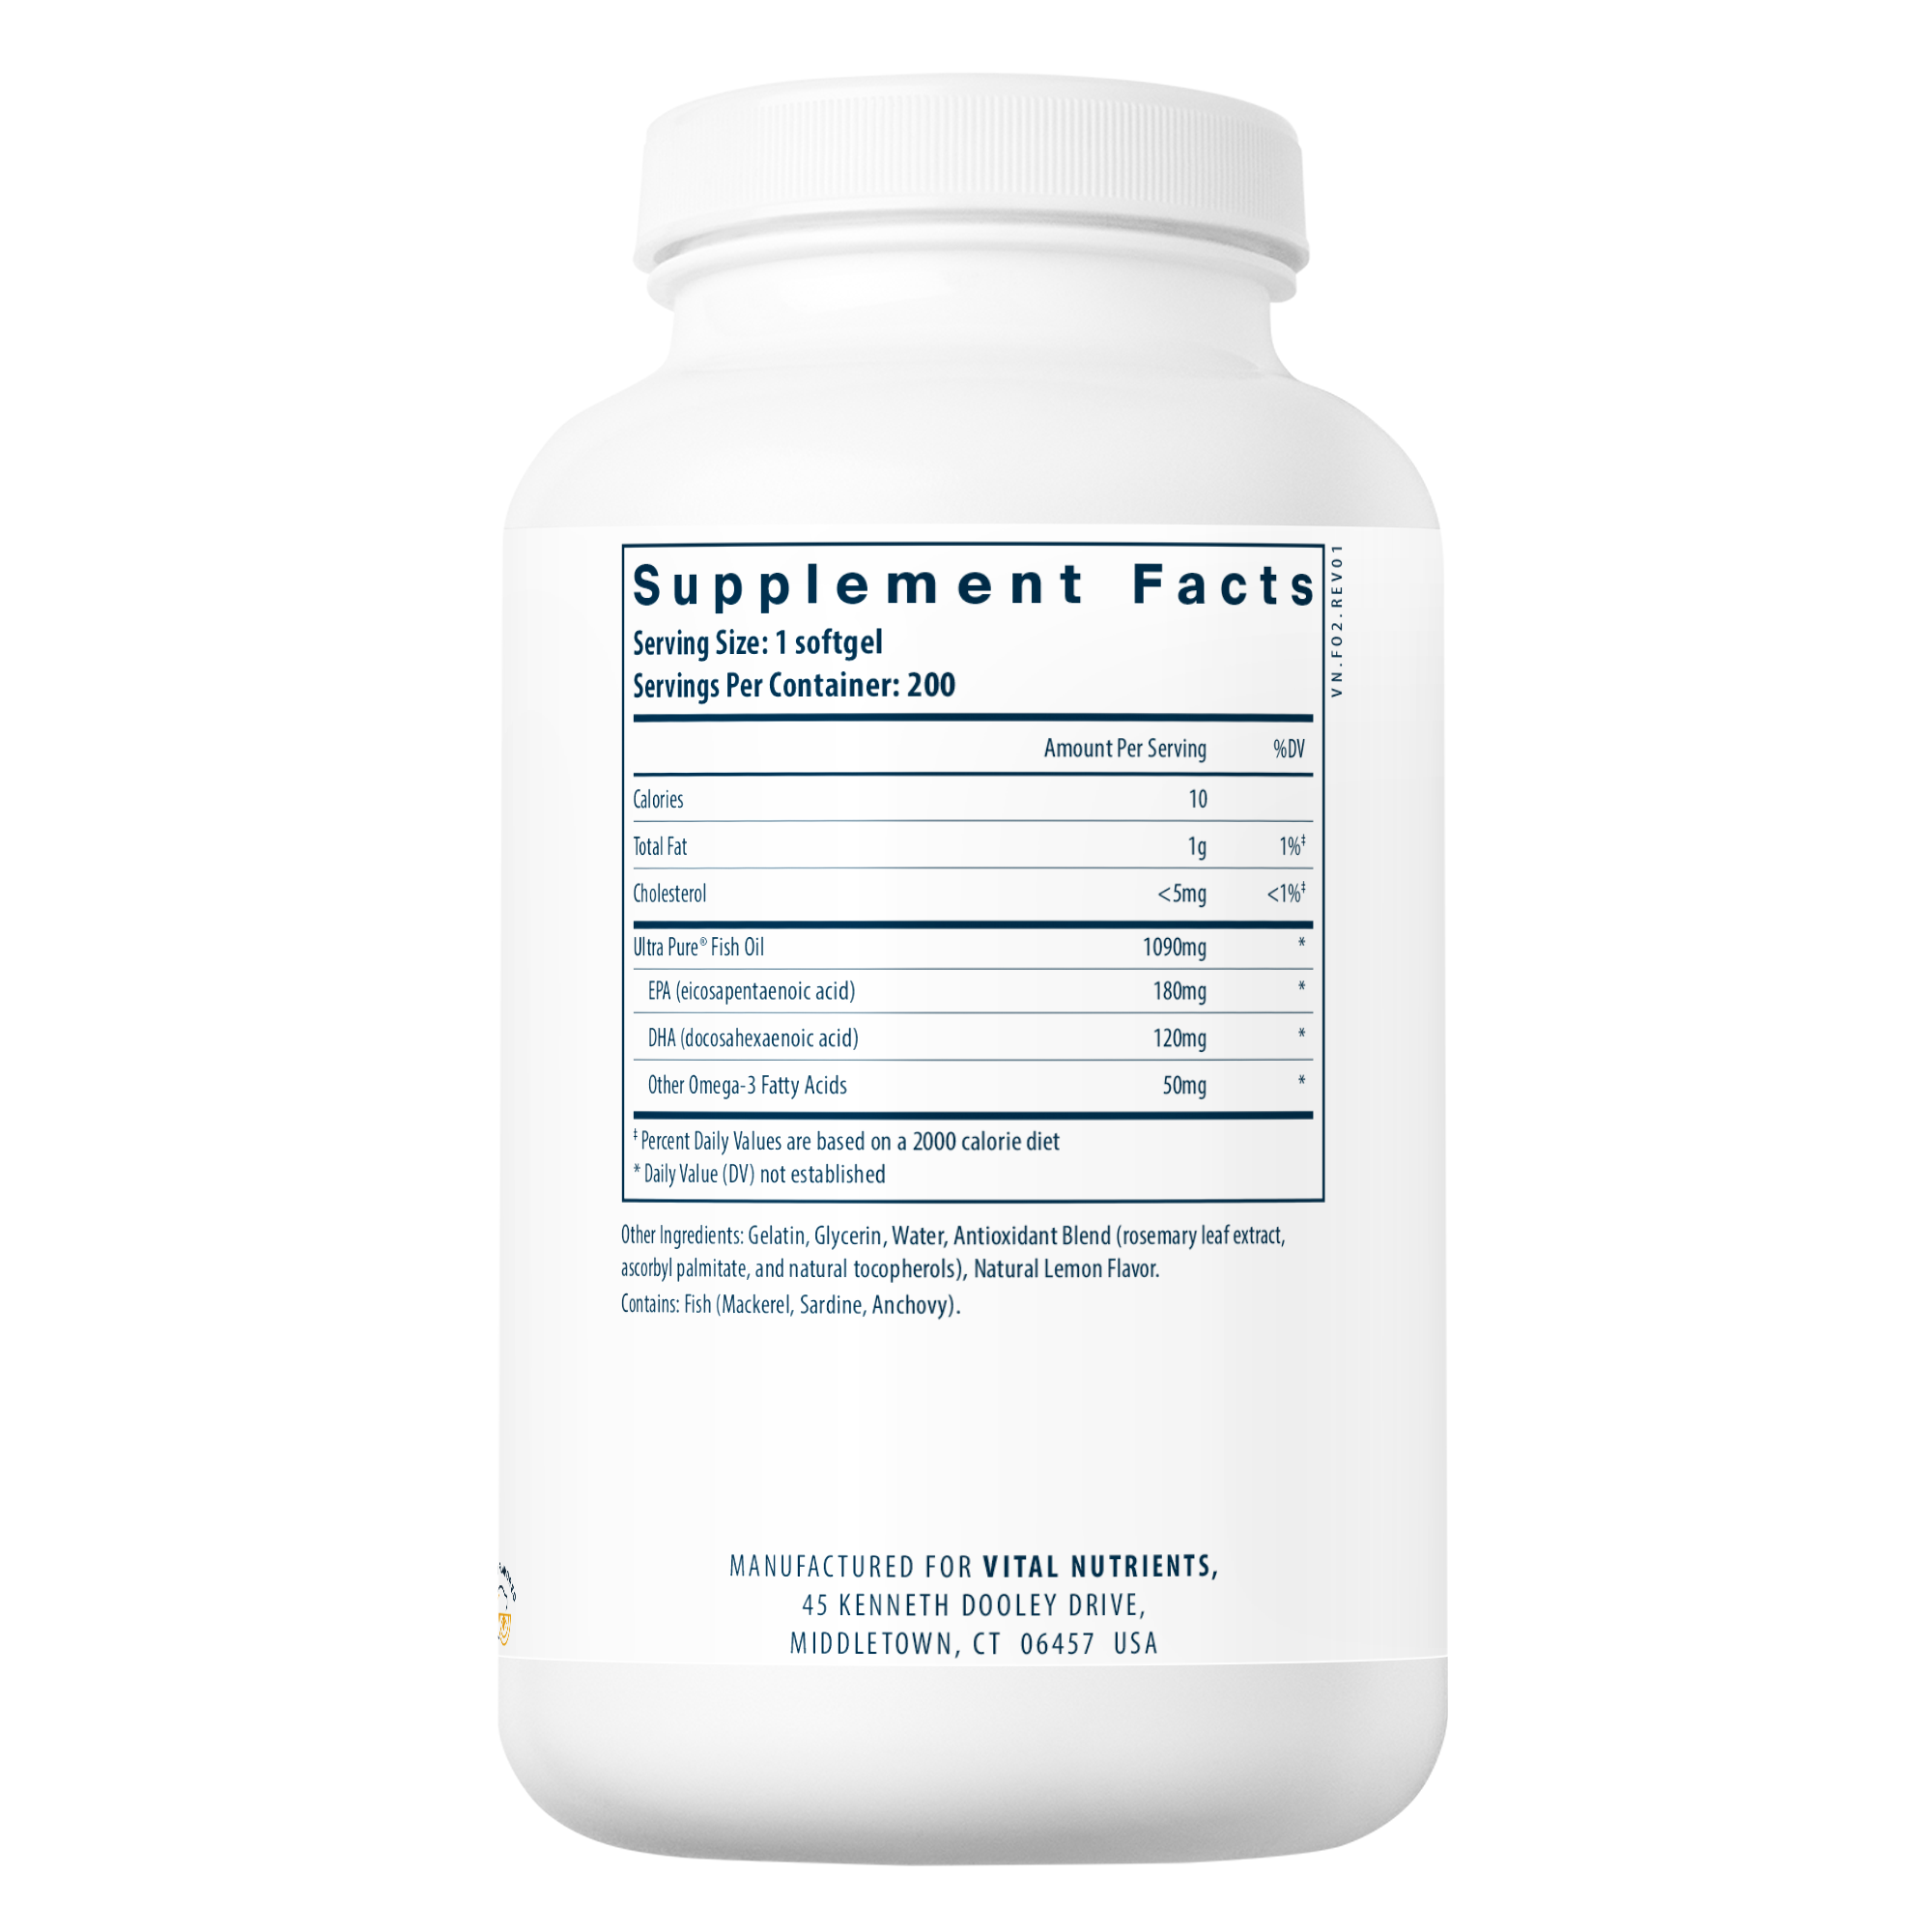 Vital Nutrients Ultra Pure Fish Oil 350 (Triglyceride Form) supplement facts panel on bottle.